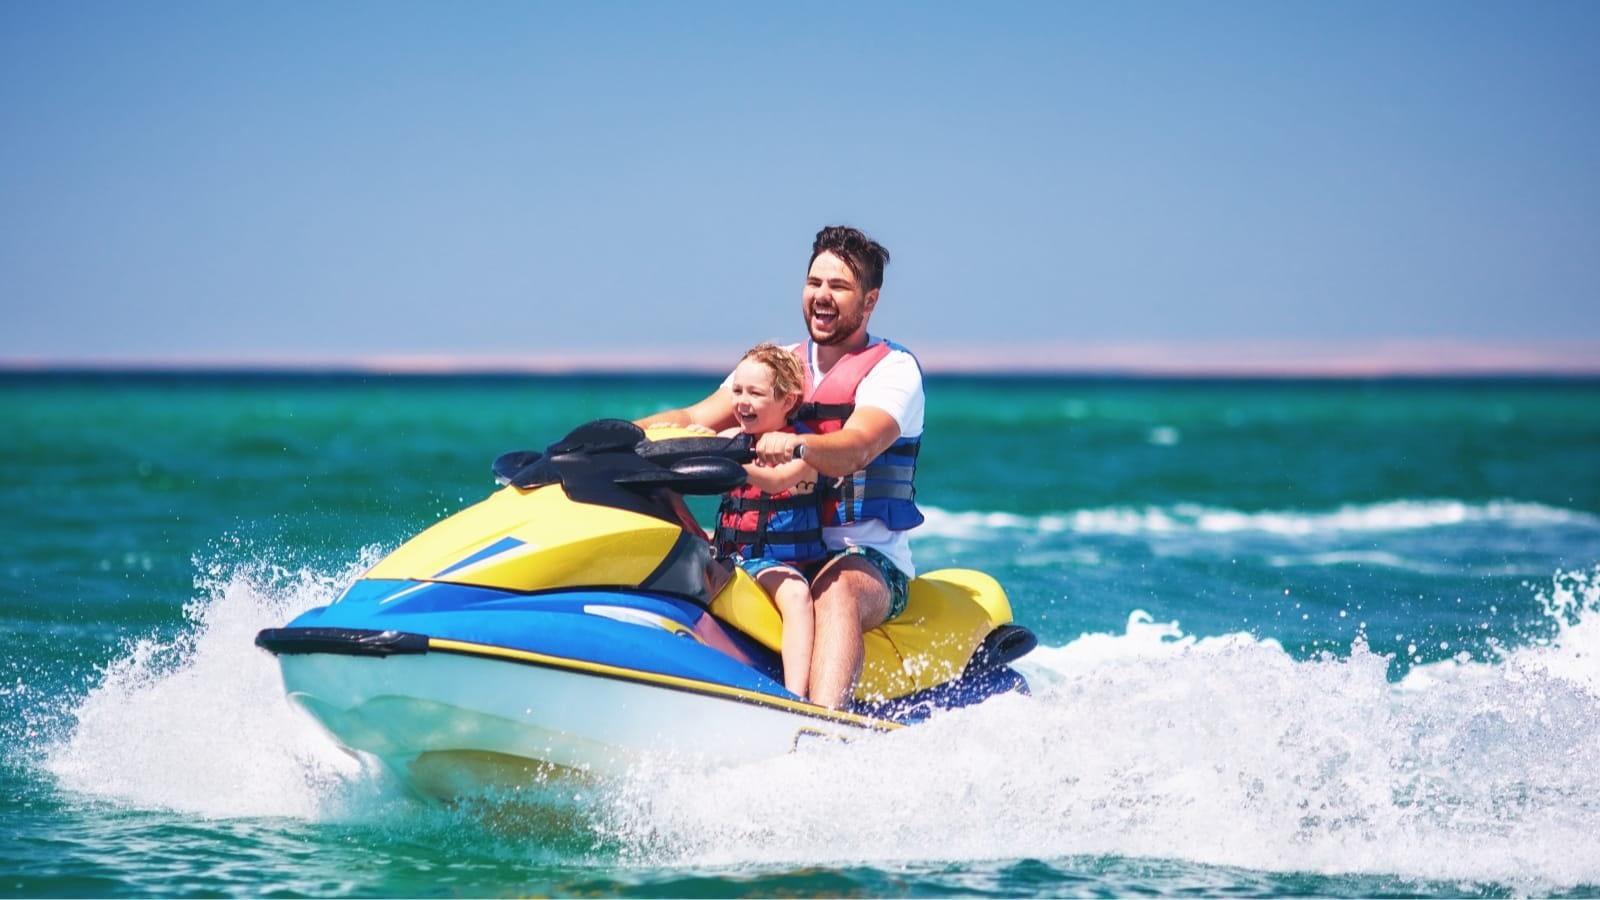 father and son riding a yellow and blue jet ski